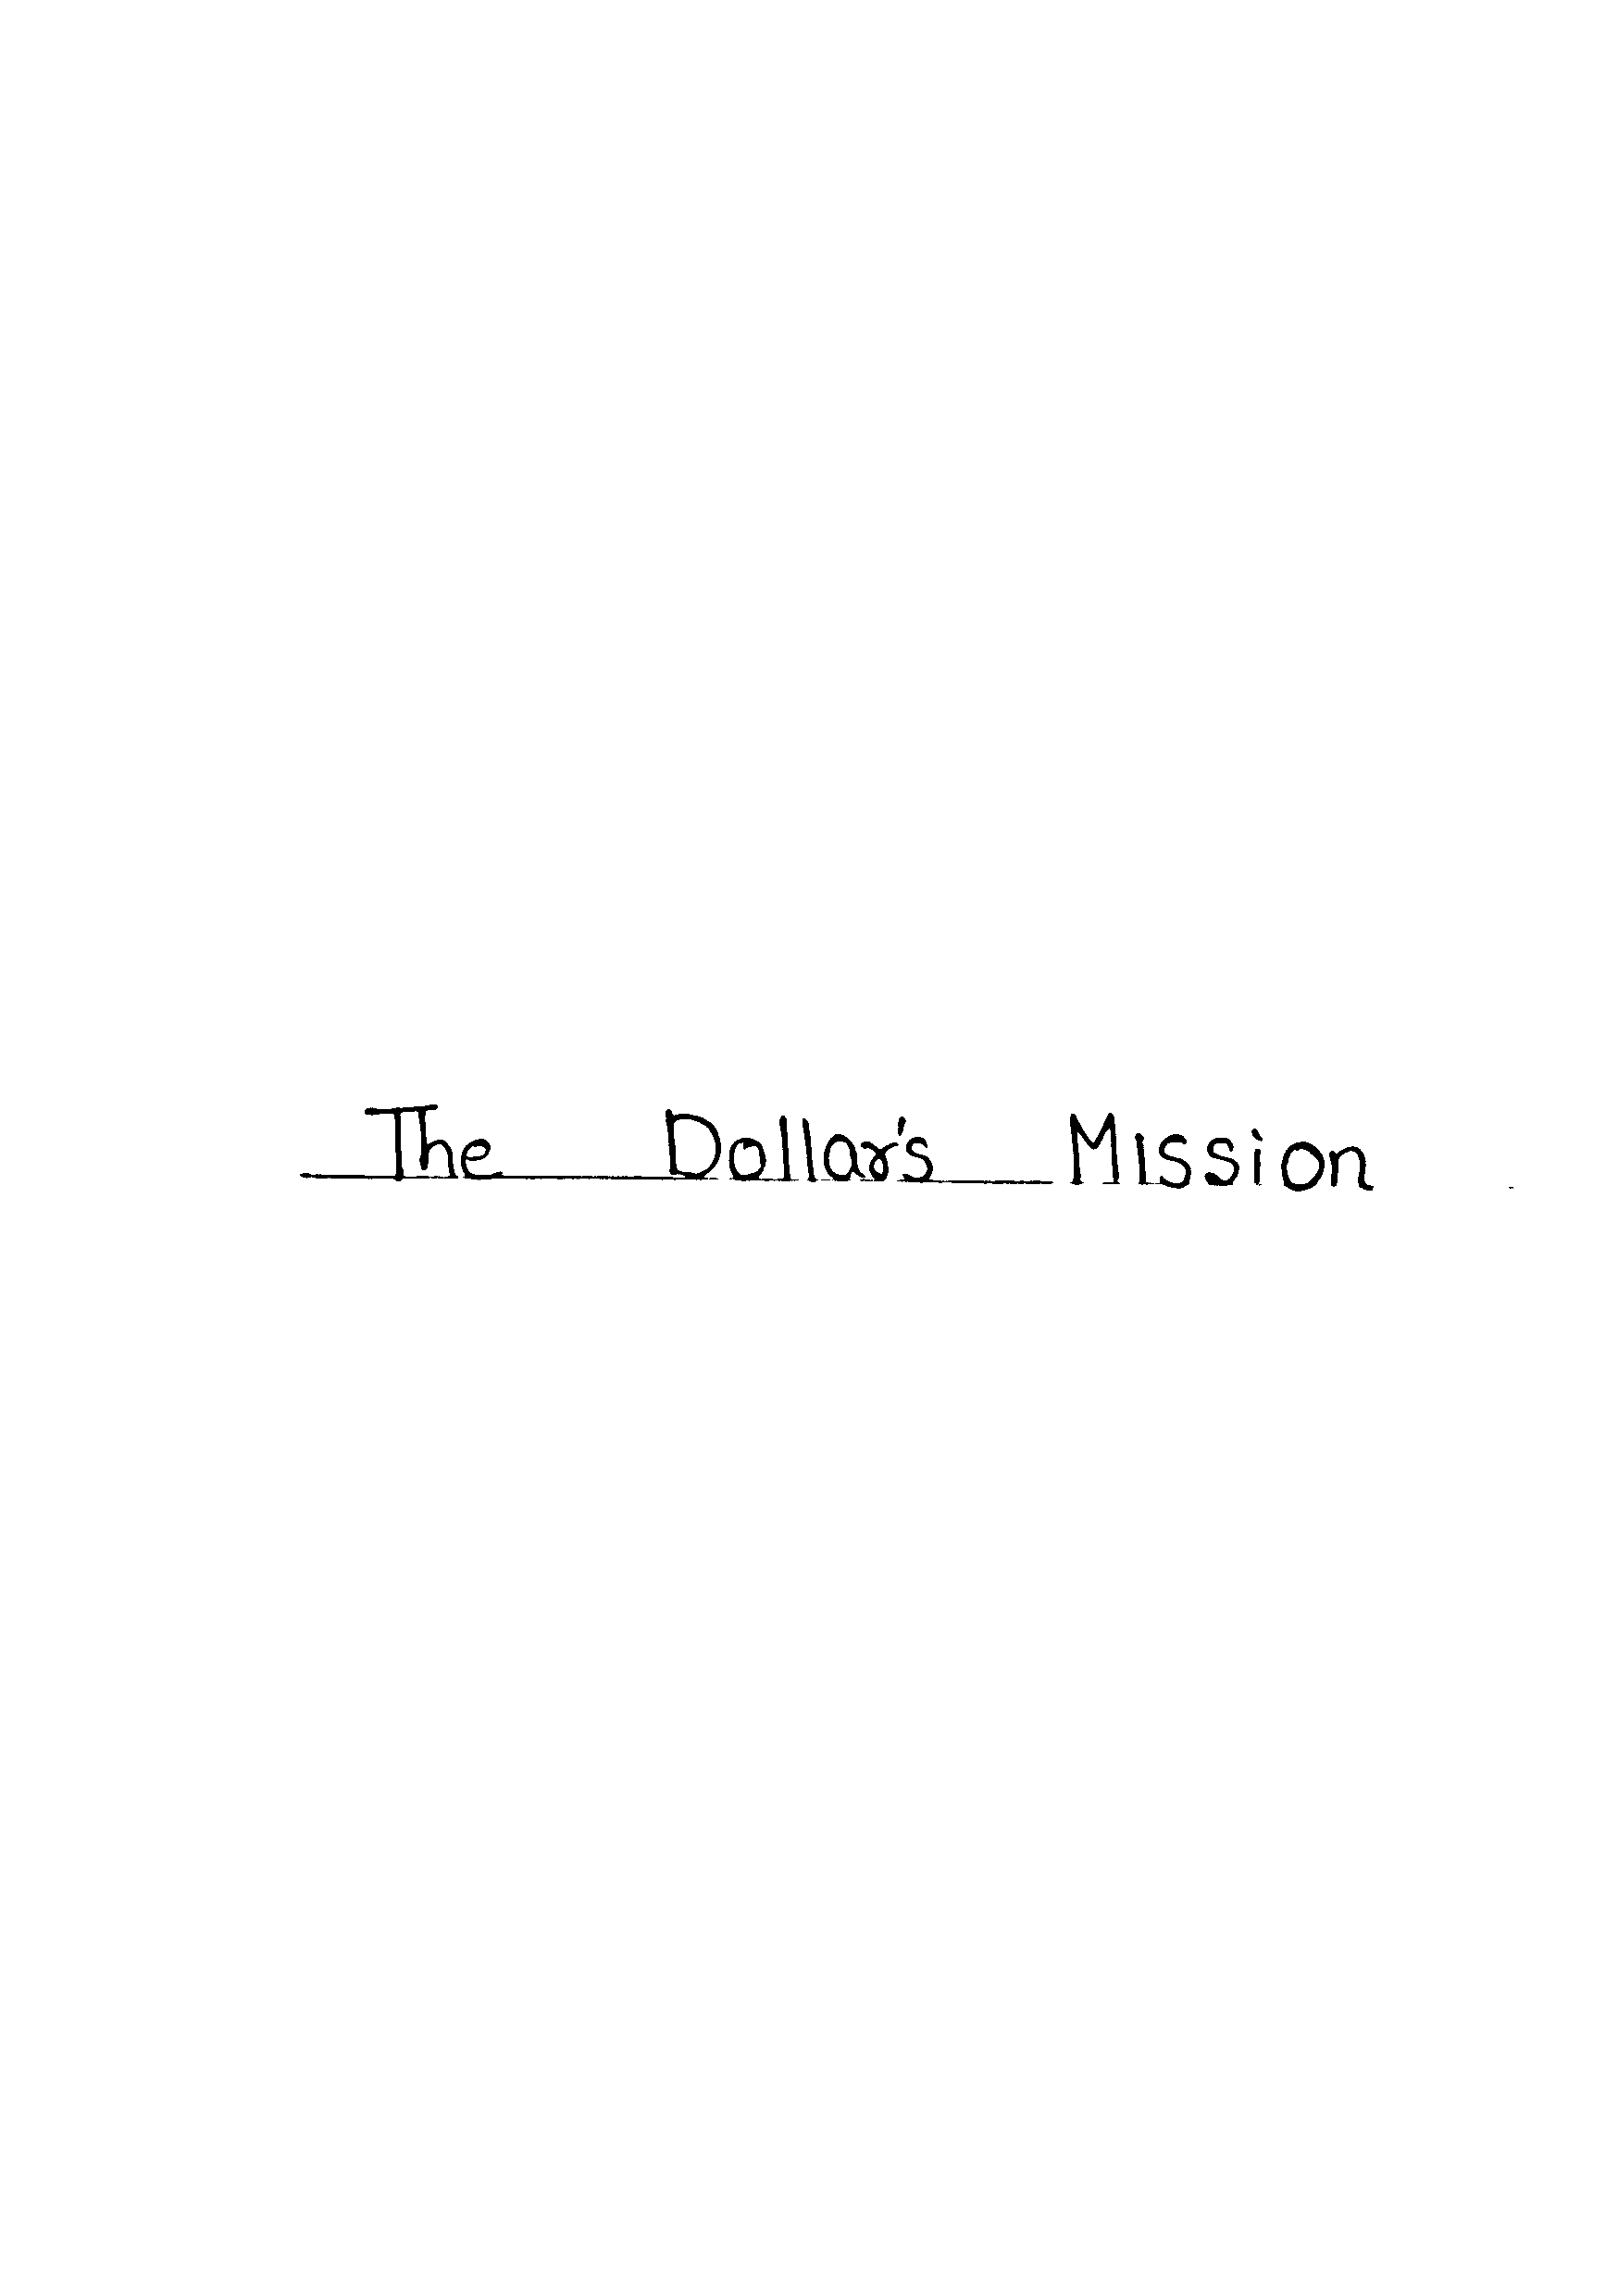 The dollar's mission